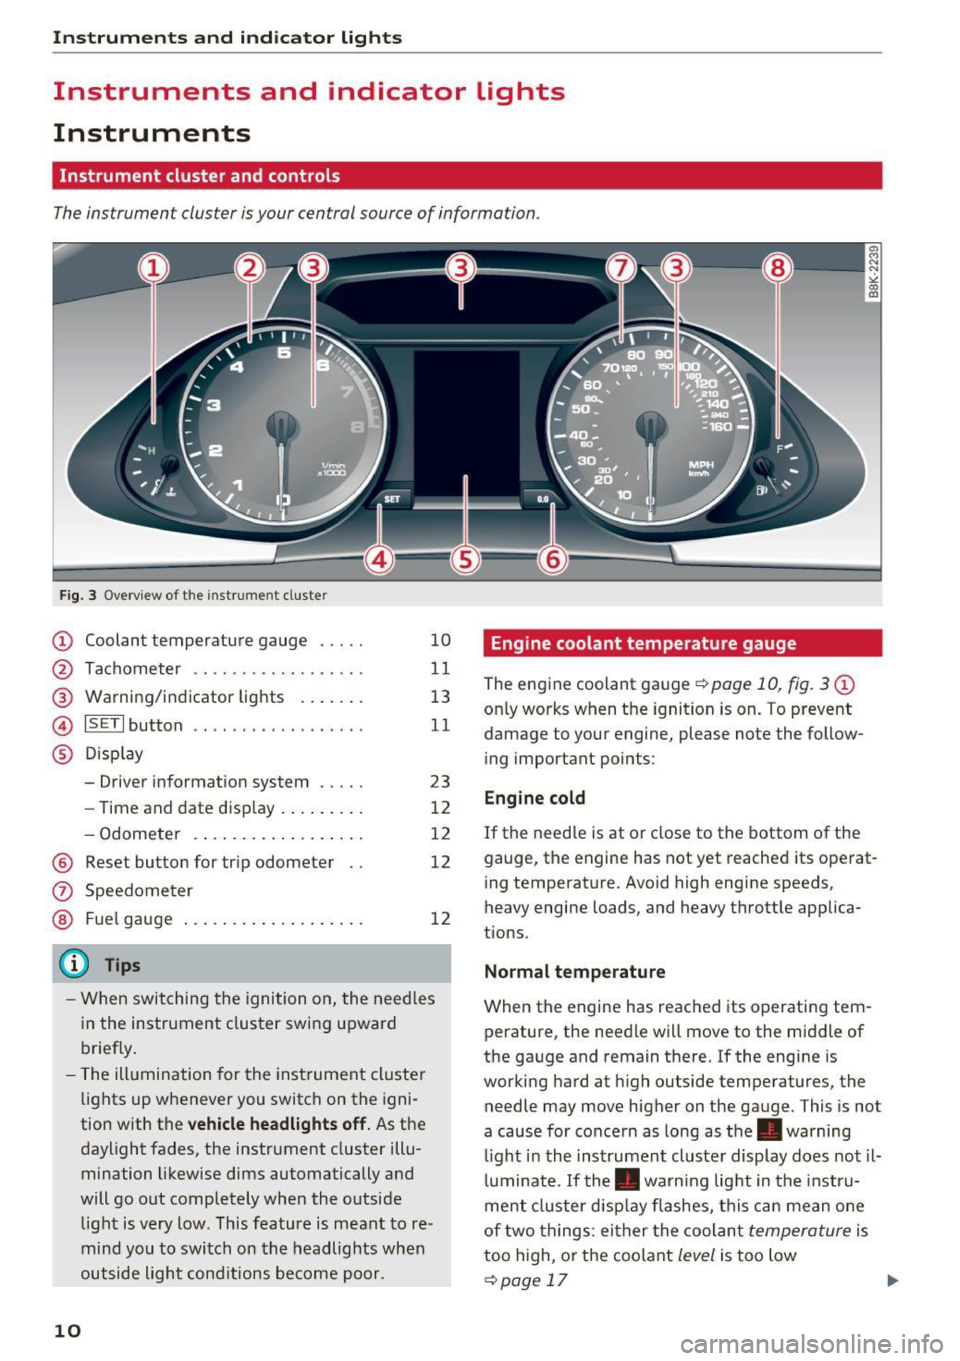 AUDI A4 2016  Owners Manual Instruments  and  indicator  lights 
Instruments  and  indicator  Lights 
Instruments 
Instrument  cluster  and controls 
The instrument  cluster  is your  central source  of  information. 
Fig.  3 Ov